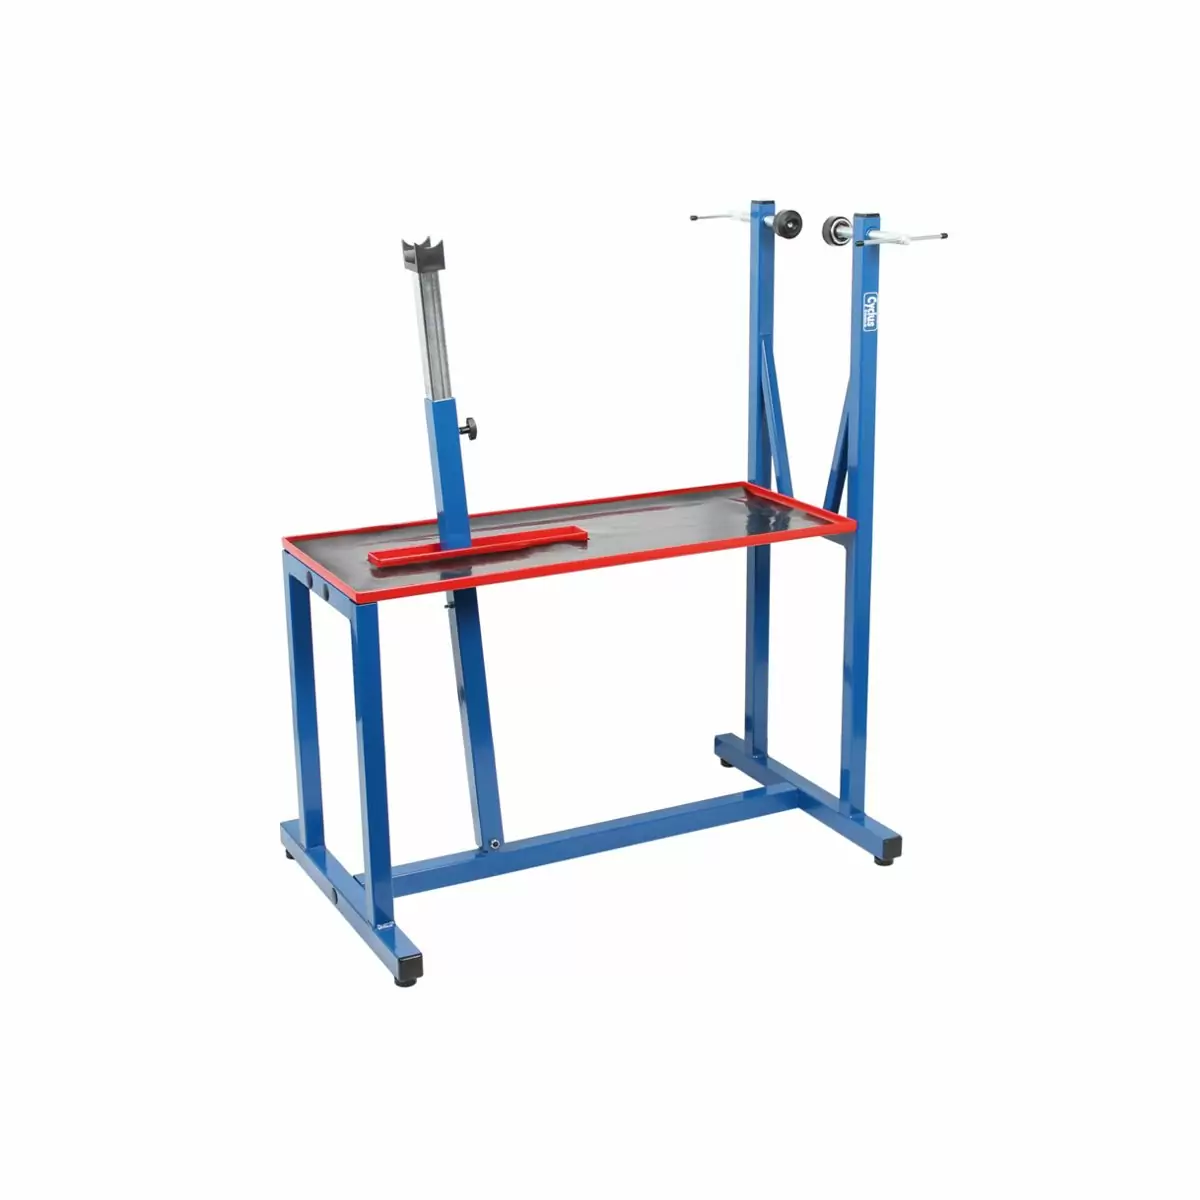 Workshop repair stand up to 29'' with plastic adapters - image